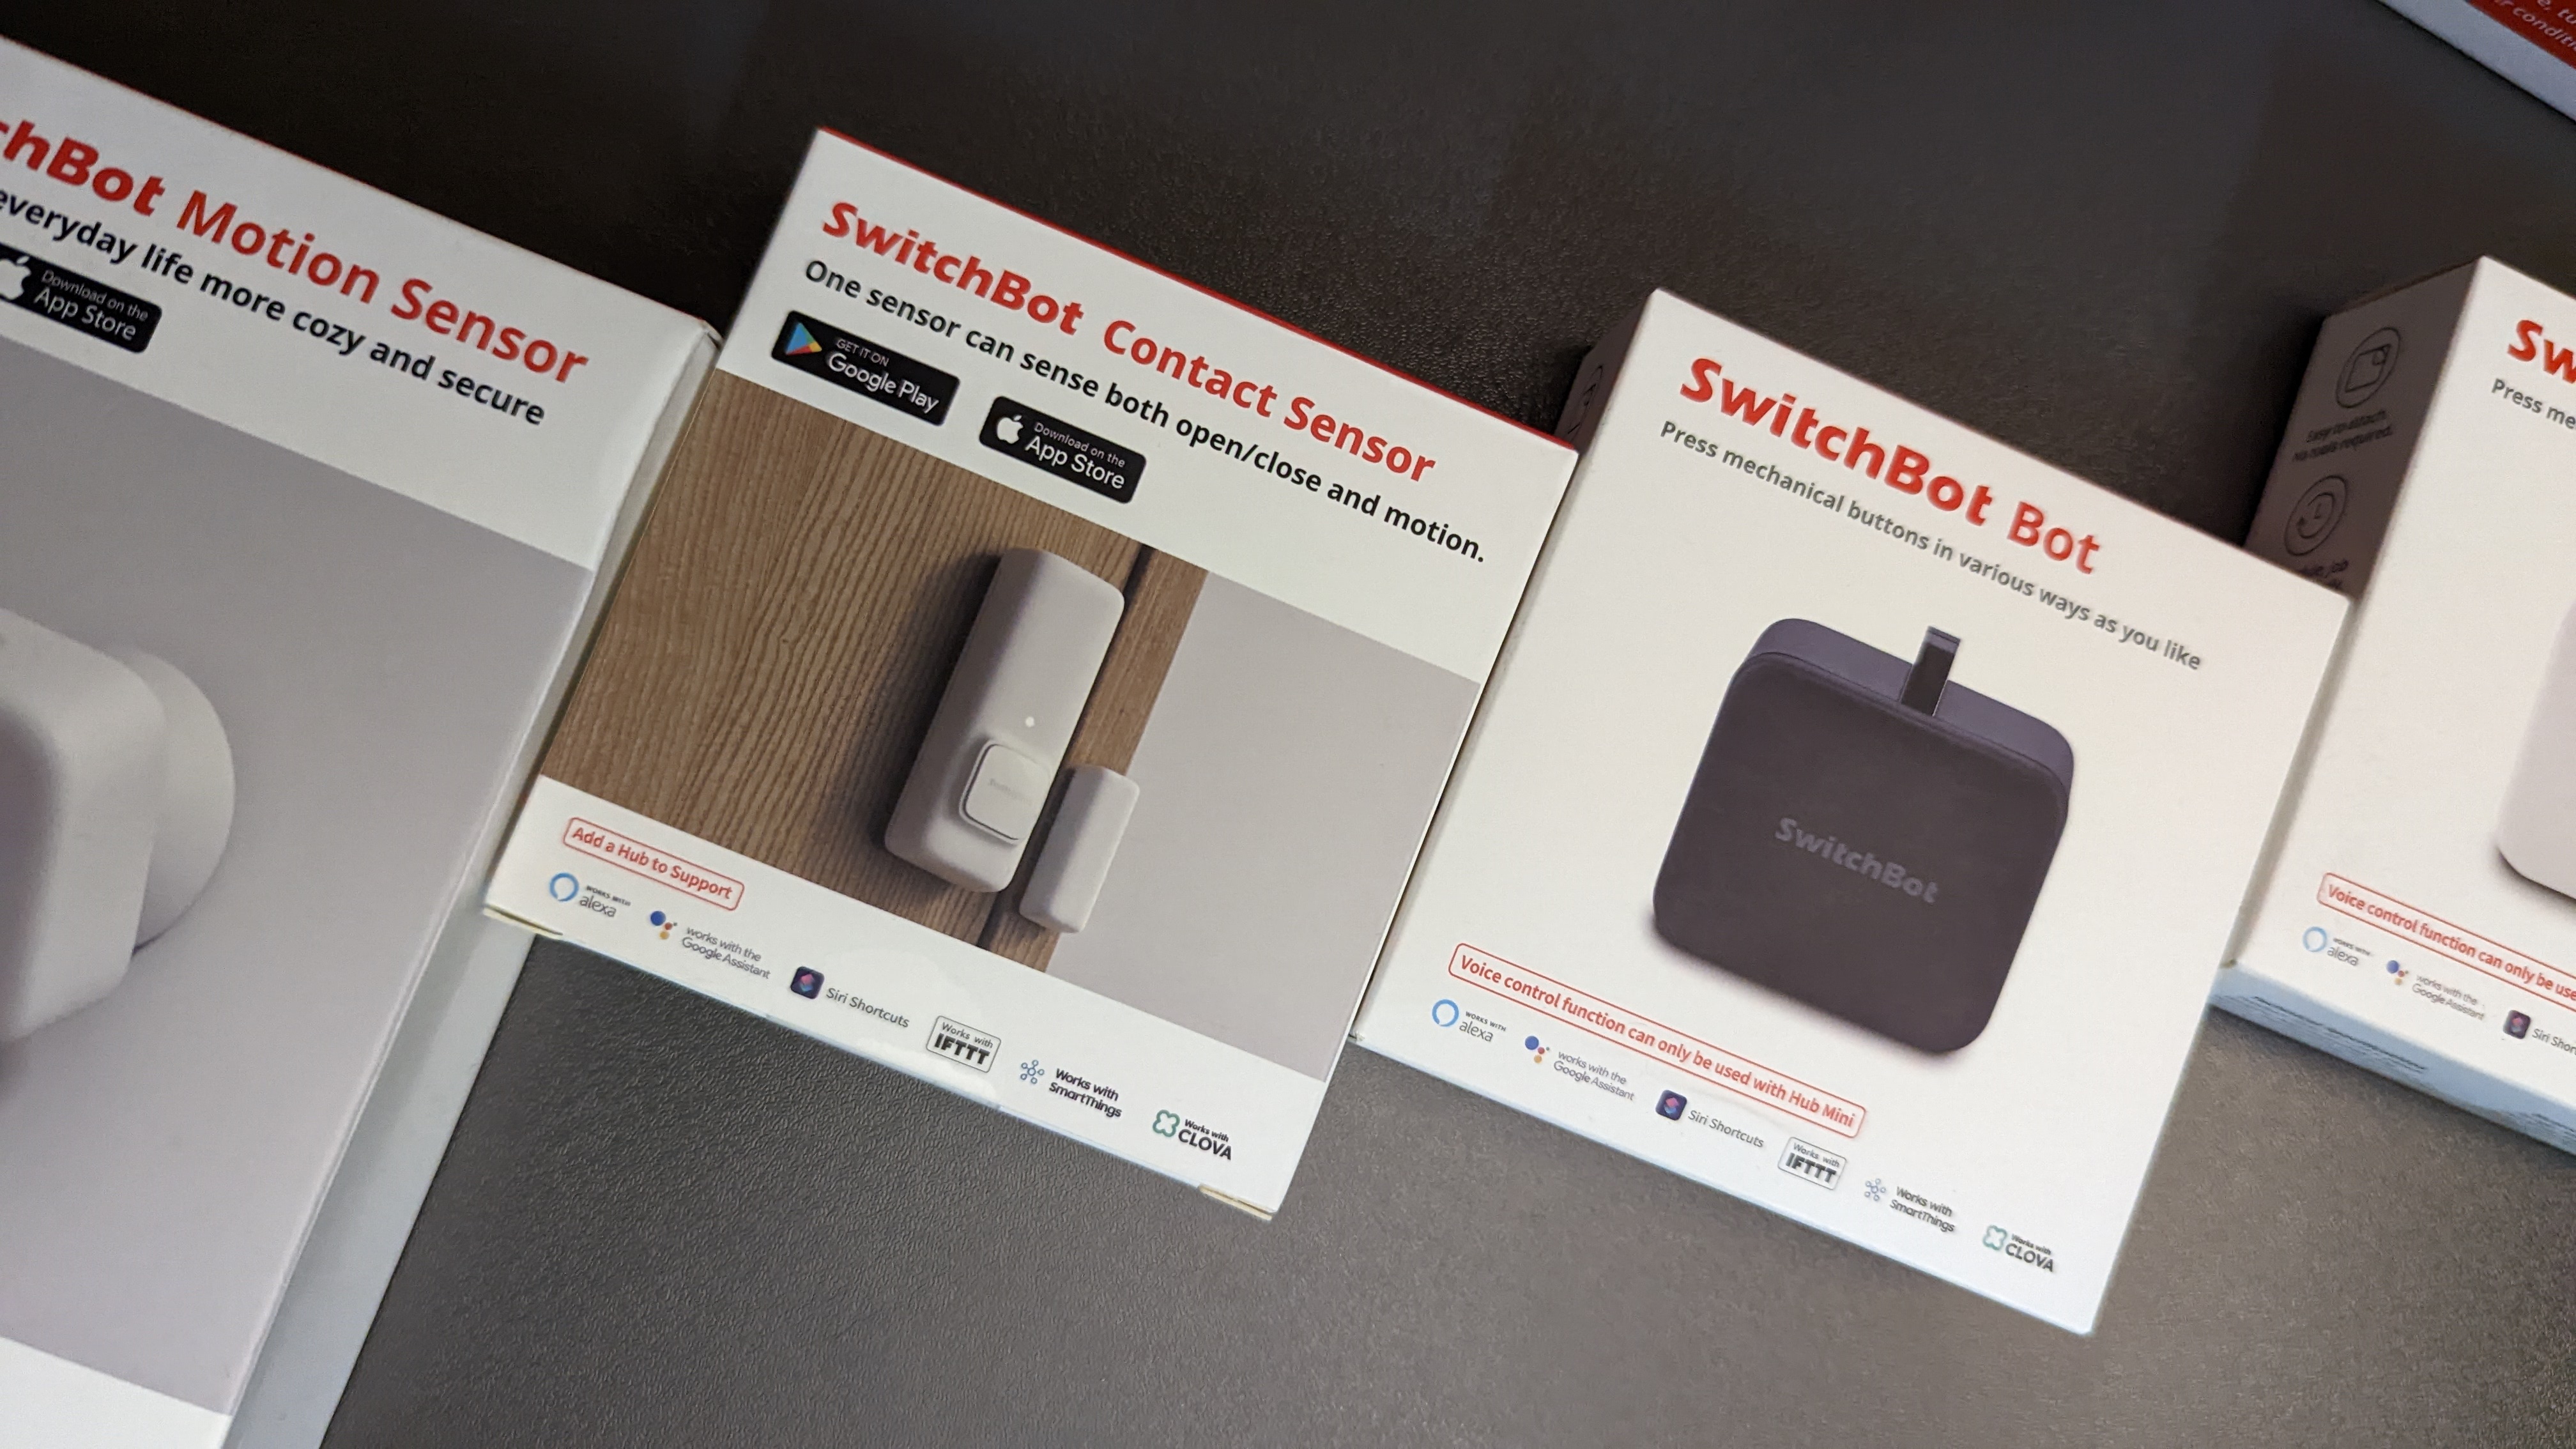 SwitchBot smart home products in a box on a table